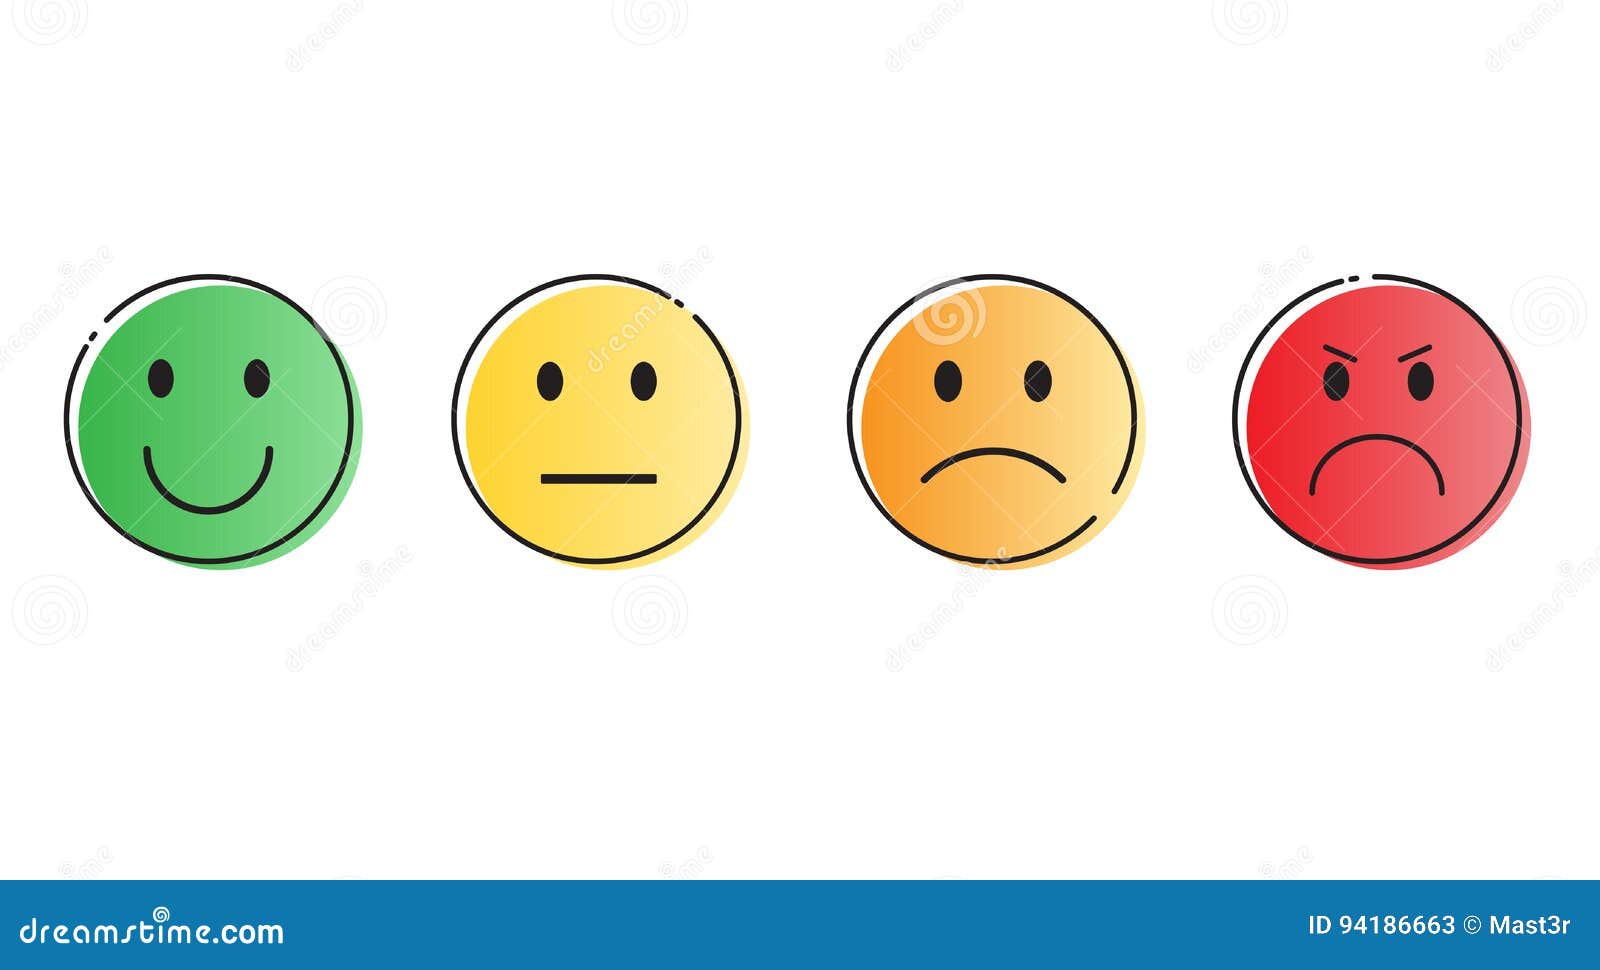 colorful smiling cartoon face people emotion icon set